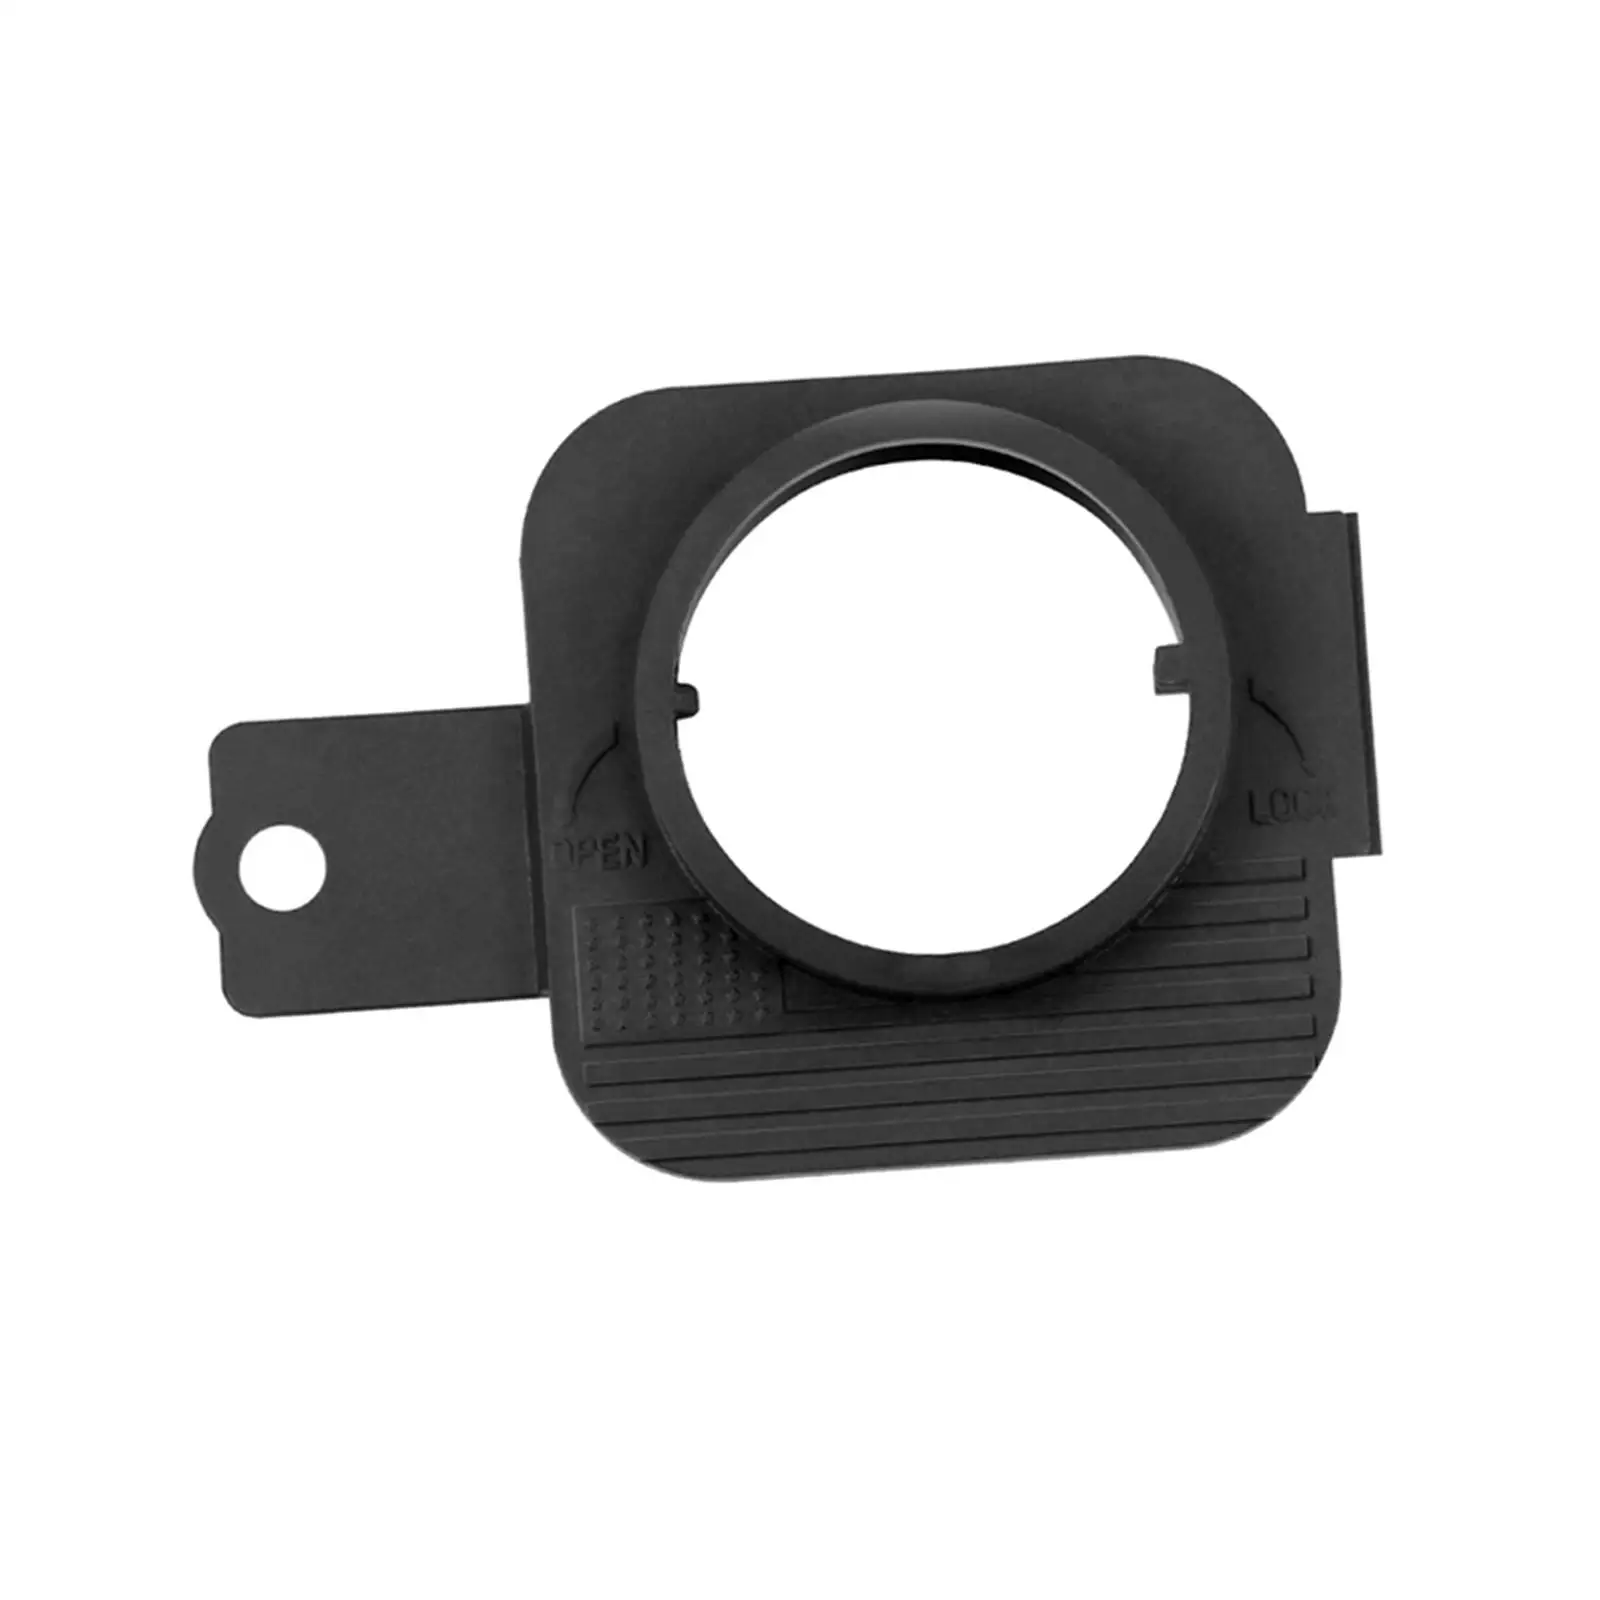 Car Gas Cap Holder Gas Cap Bracket for Toyota for tacoma Good Performance